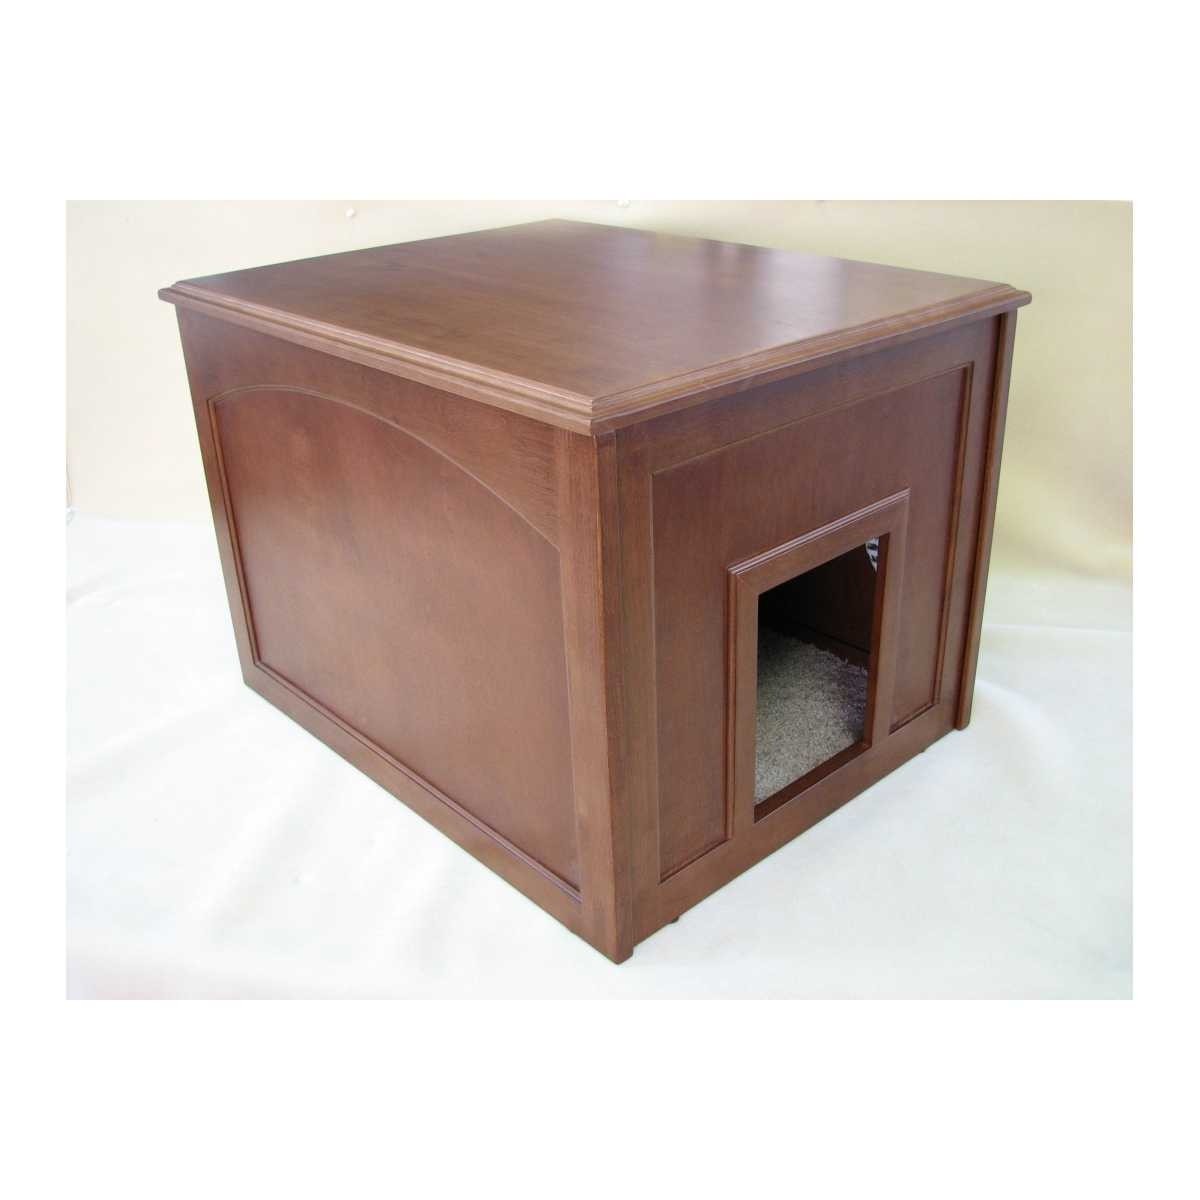 Details about doggie cat litter box cabinet mahogany wooden dog